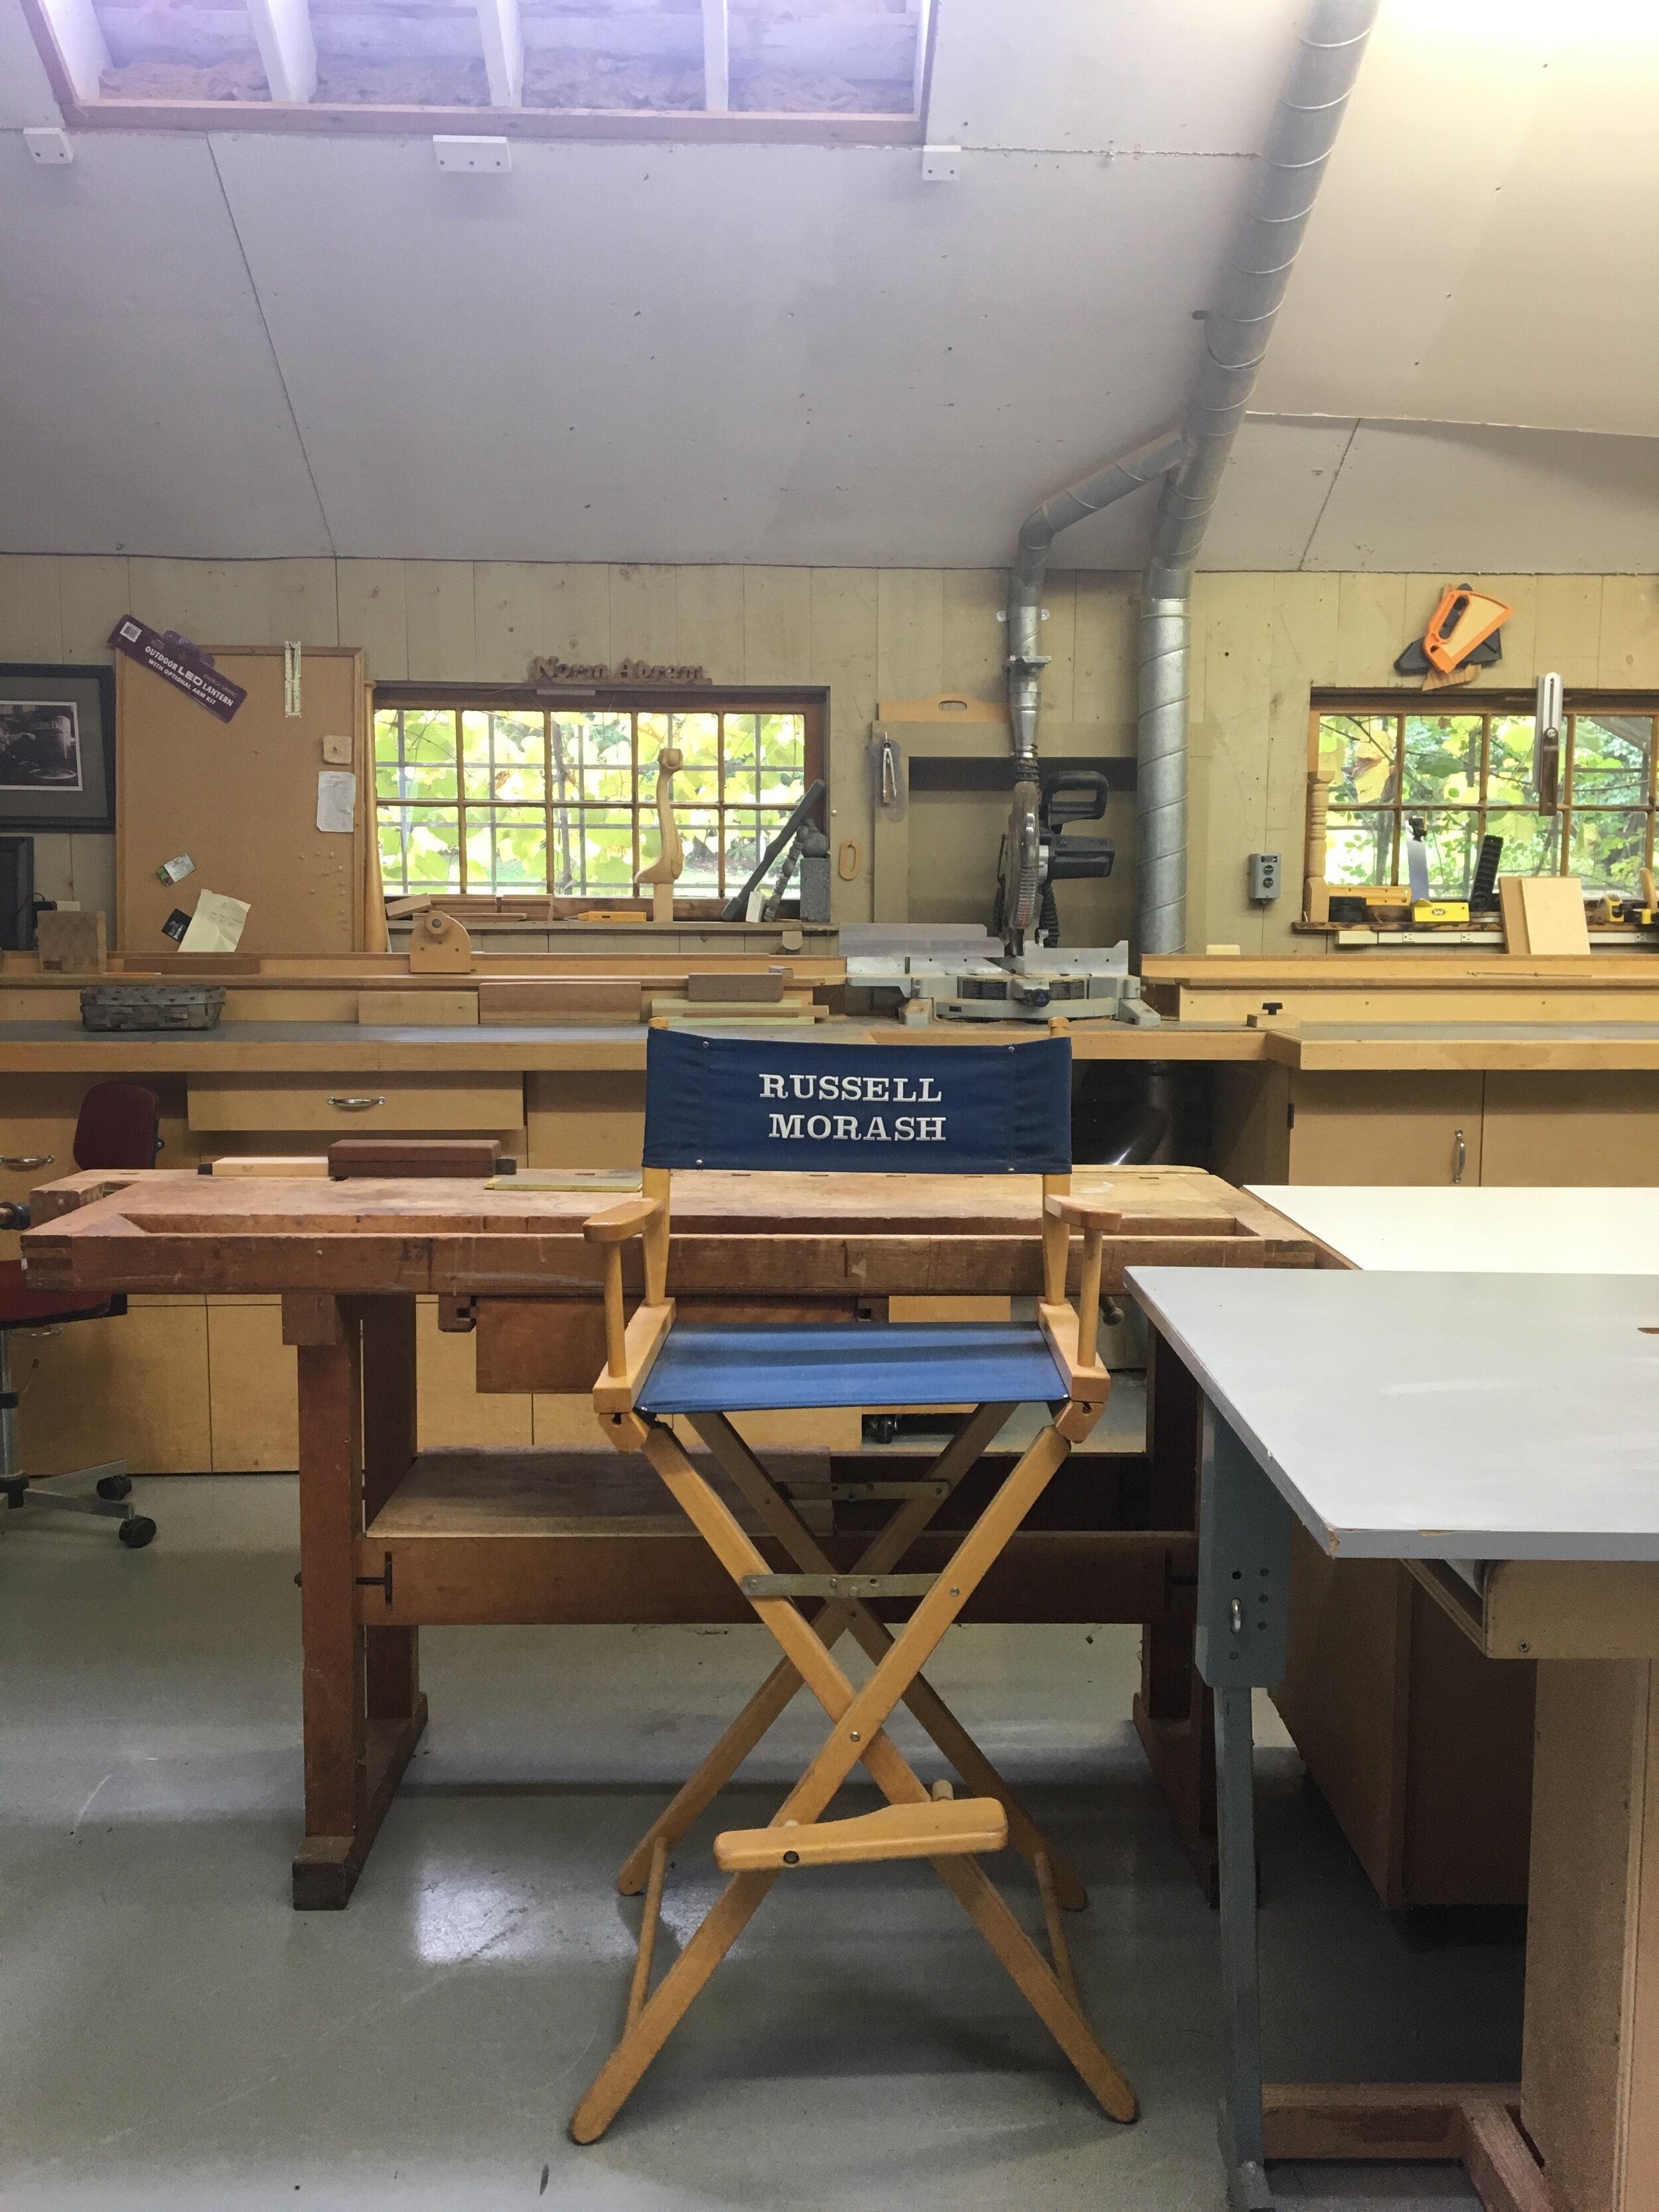 Russell Morash's director's chair with Norm Abram's nameplate above the window. (Photo by author).